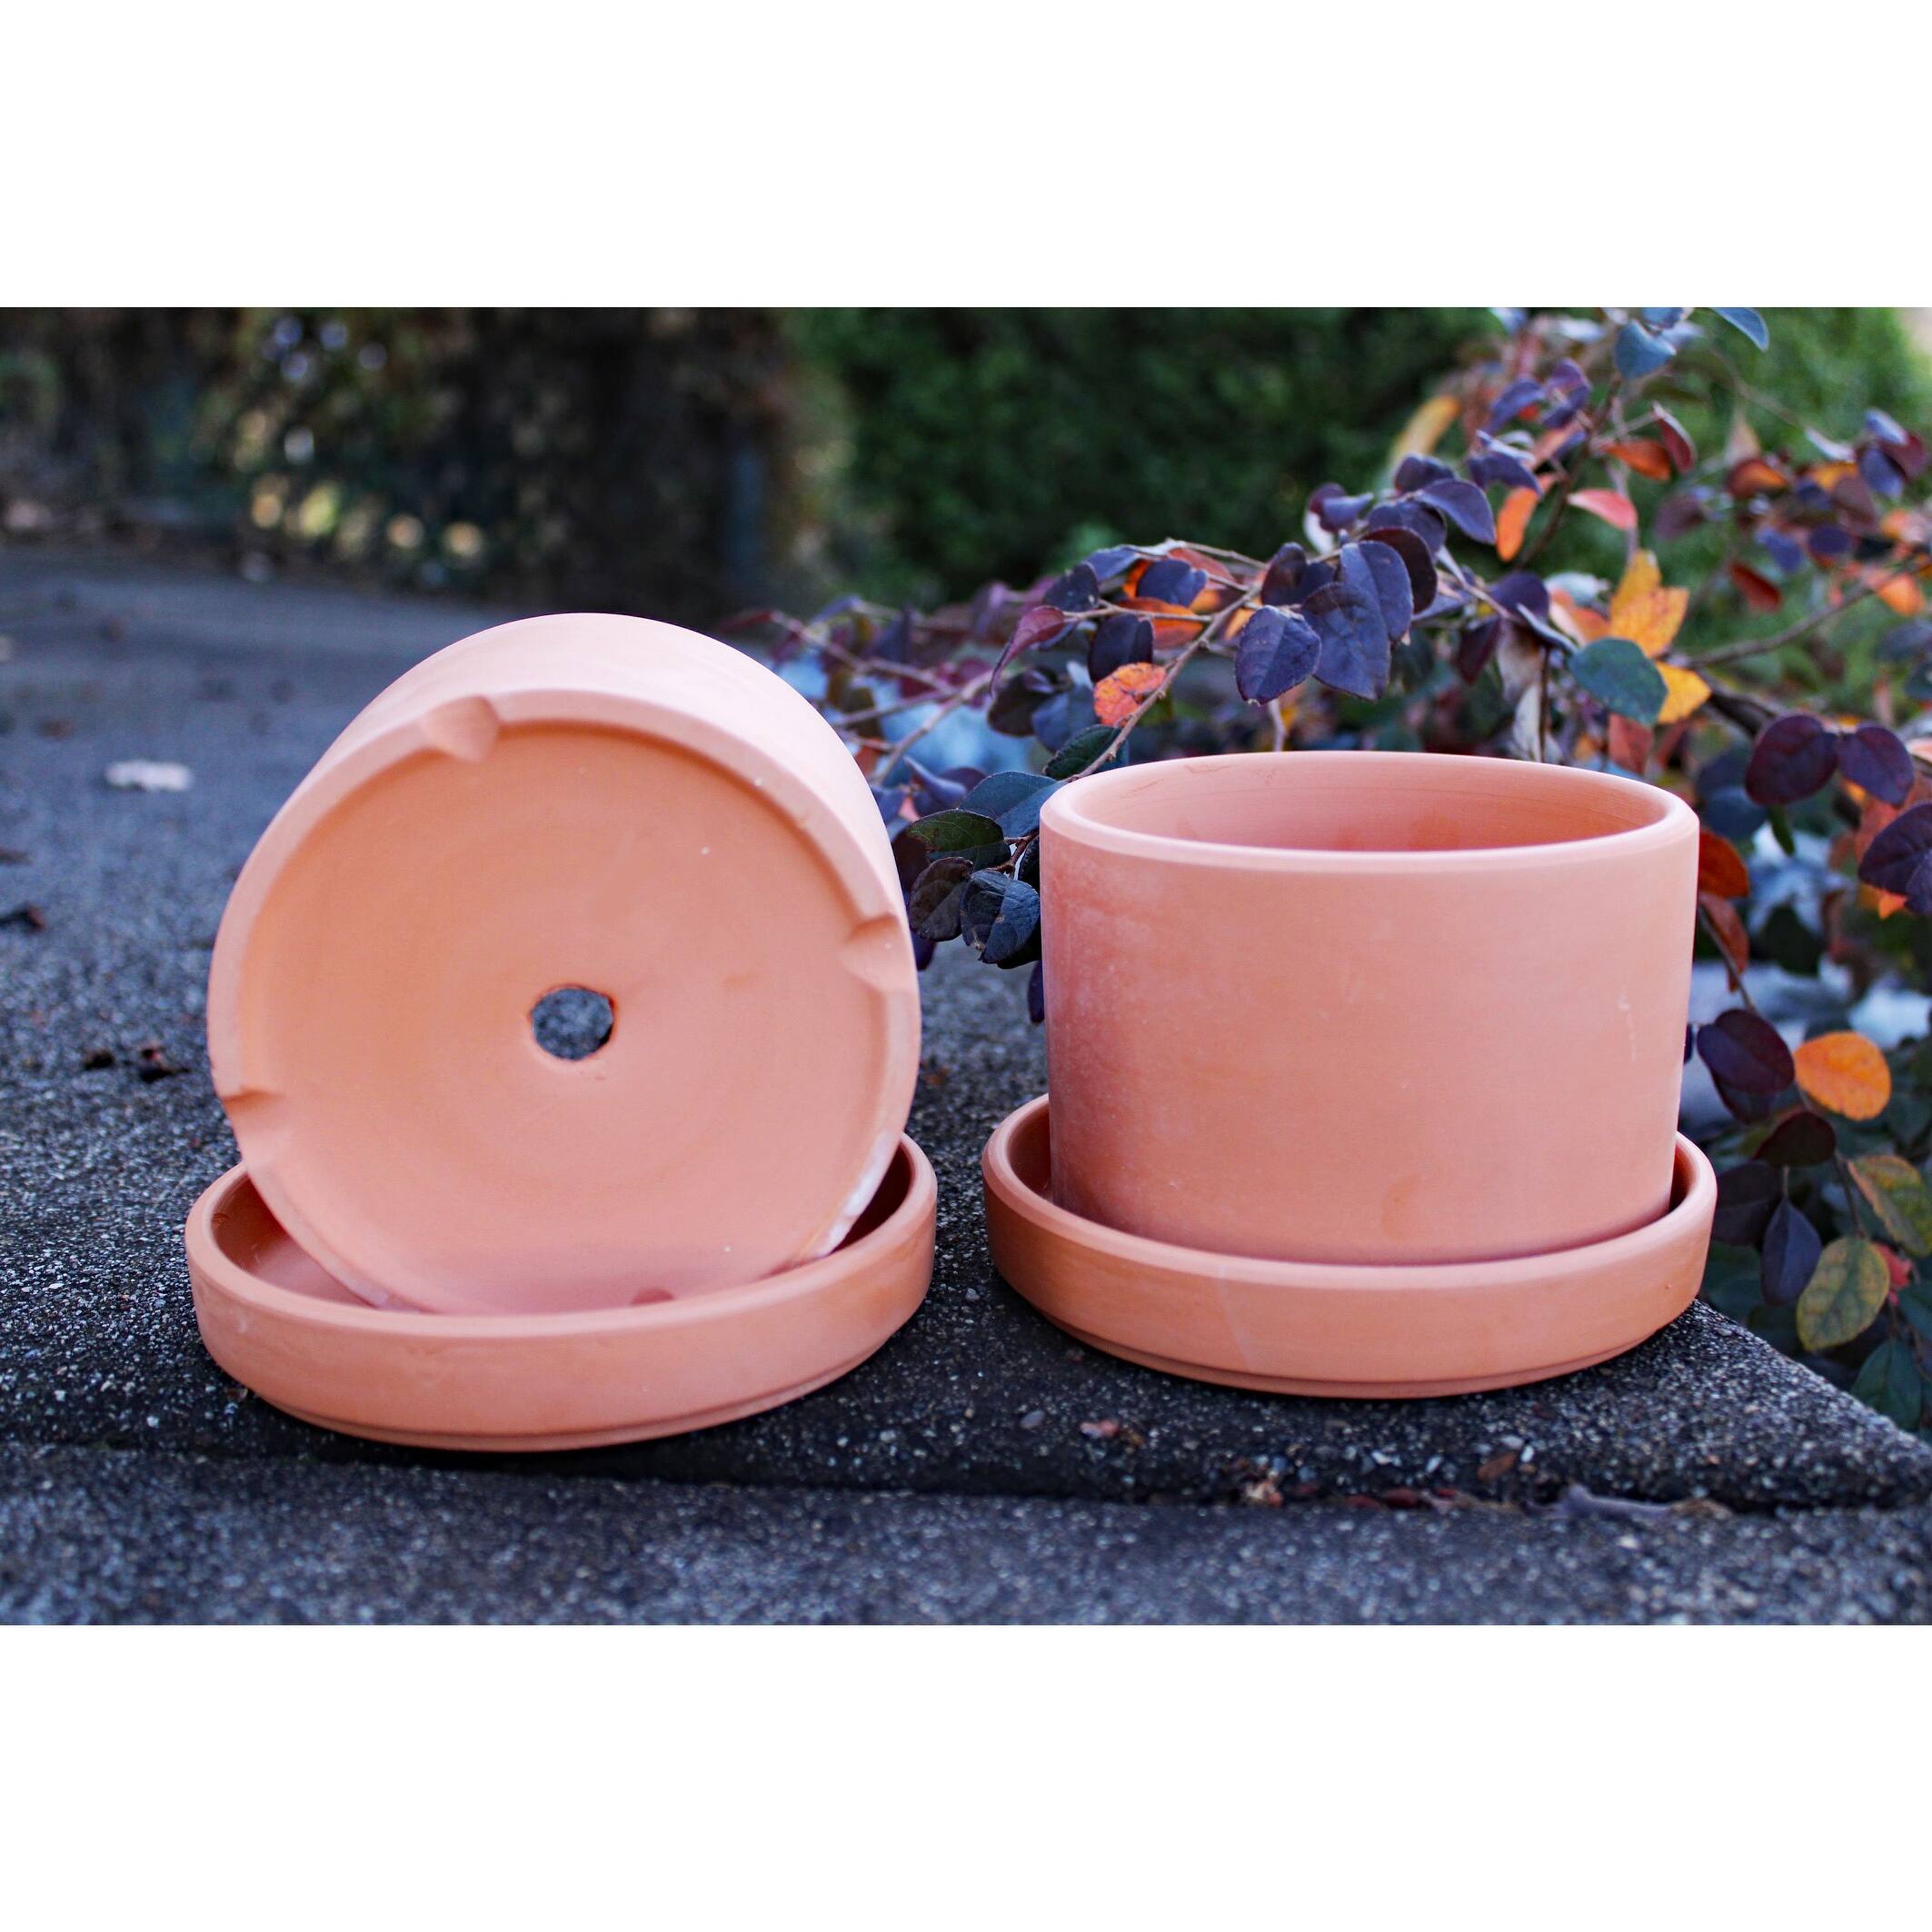 Set of 2 Terracotta Round Fat Walled Garden Planters with Individual Trays, 2 SIZES AVILABLE